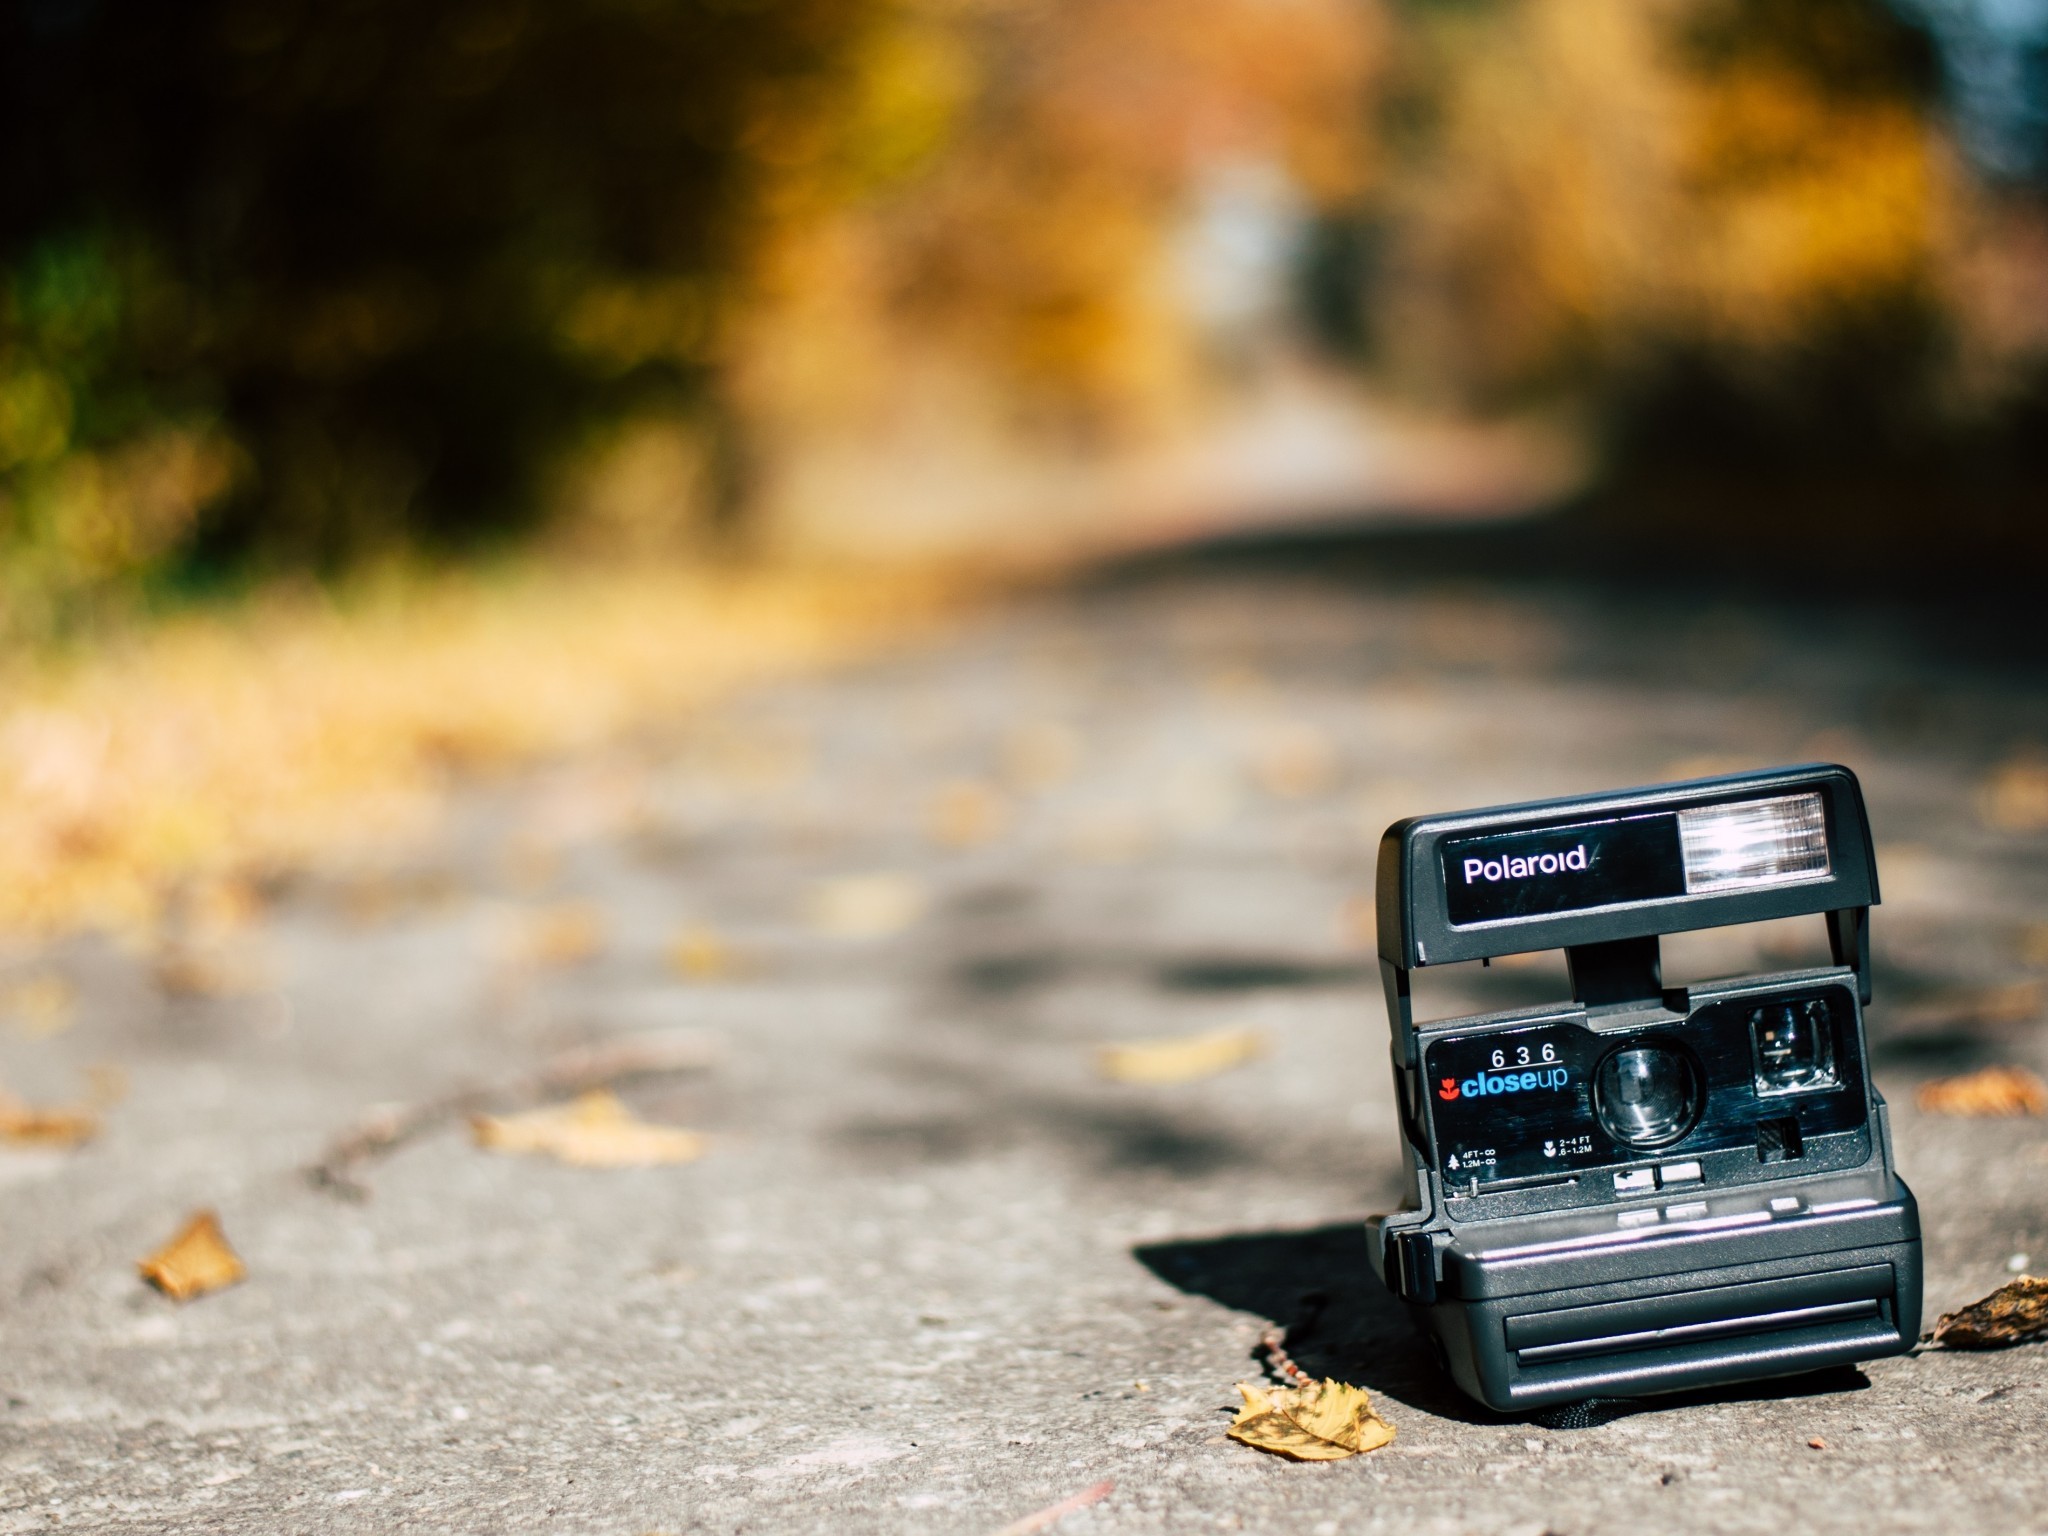 Polaroid Camera, Blurry, Photography, Leaves, Autumn - Instant Camera - HD Wallpaper 